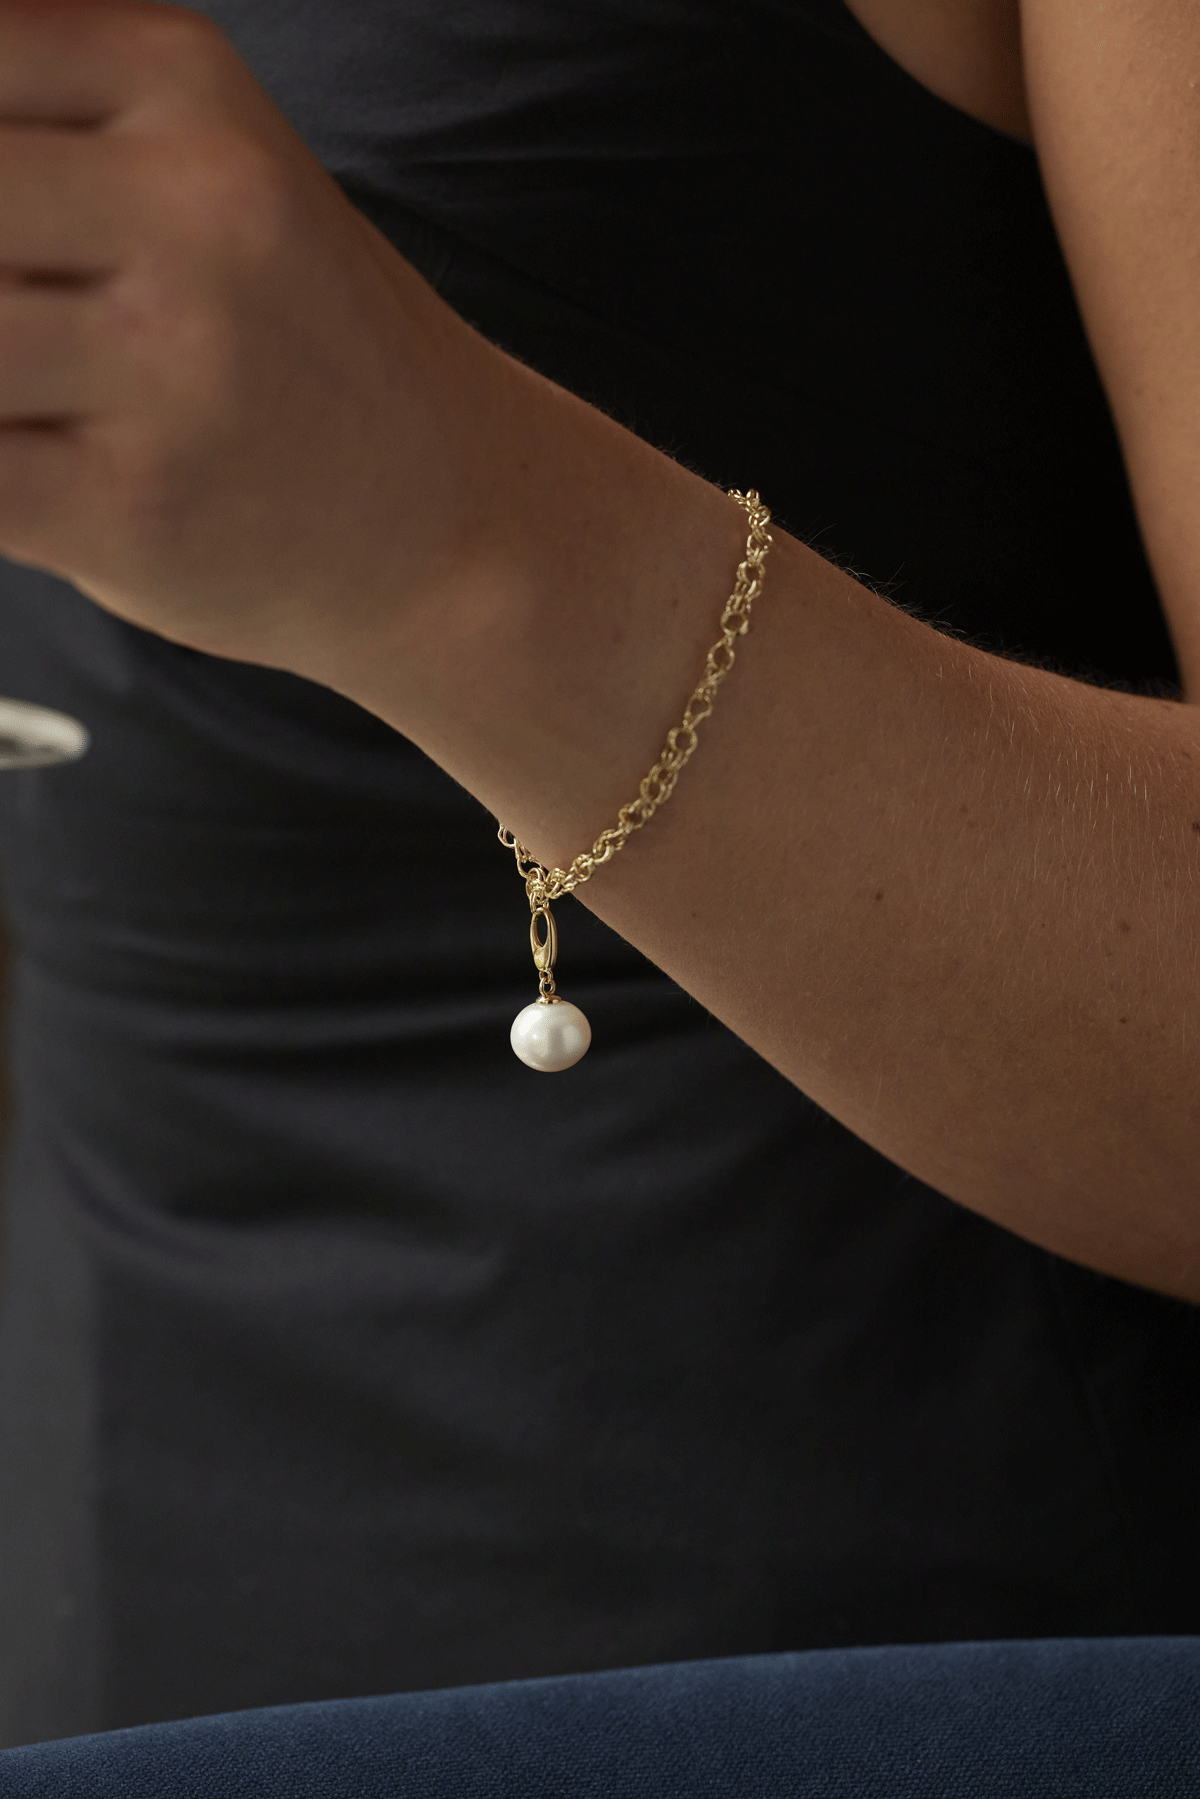 Woman's wrist with gold chain charm bracelet with singular pearl charm